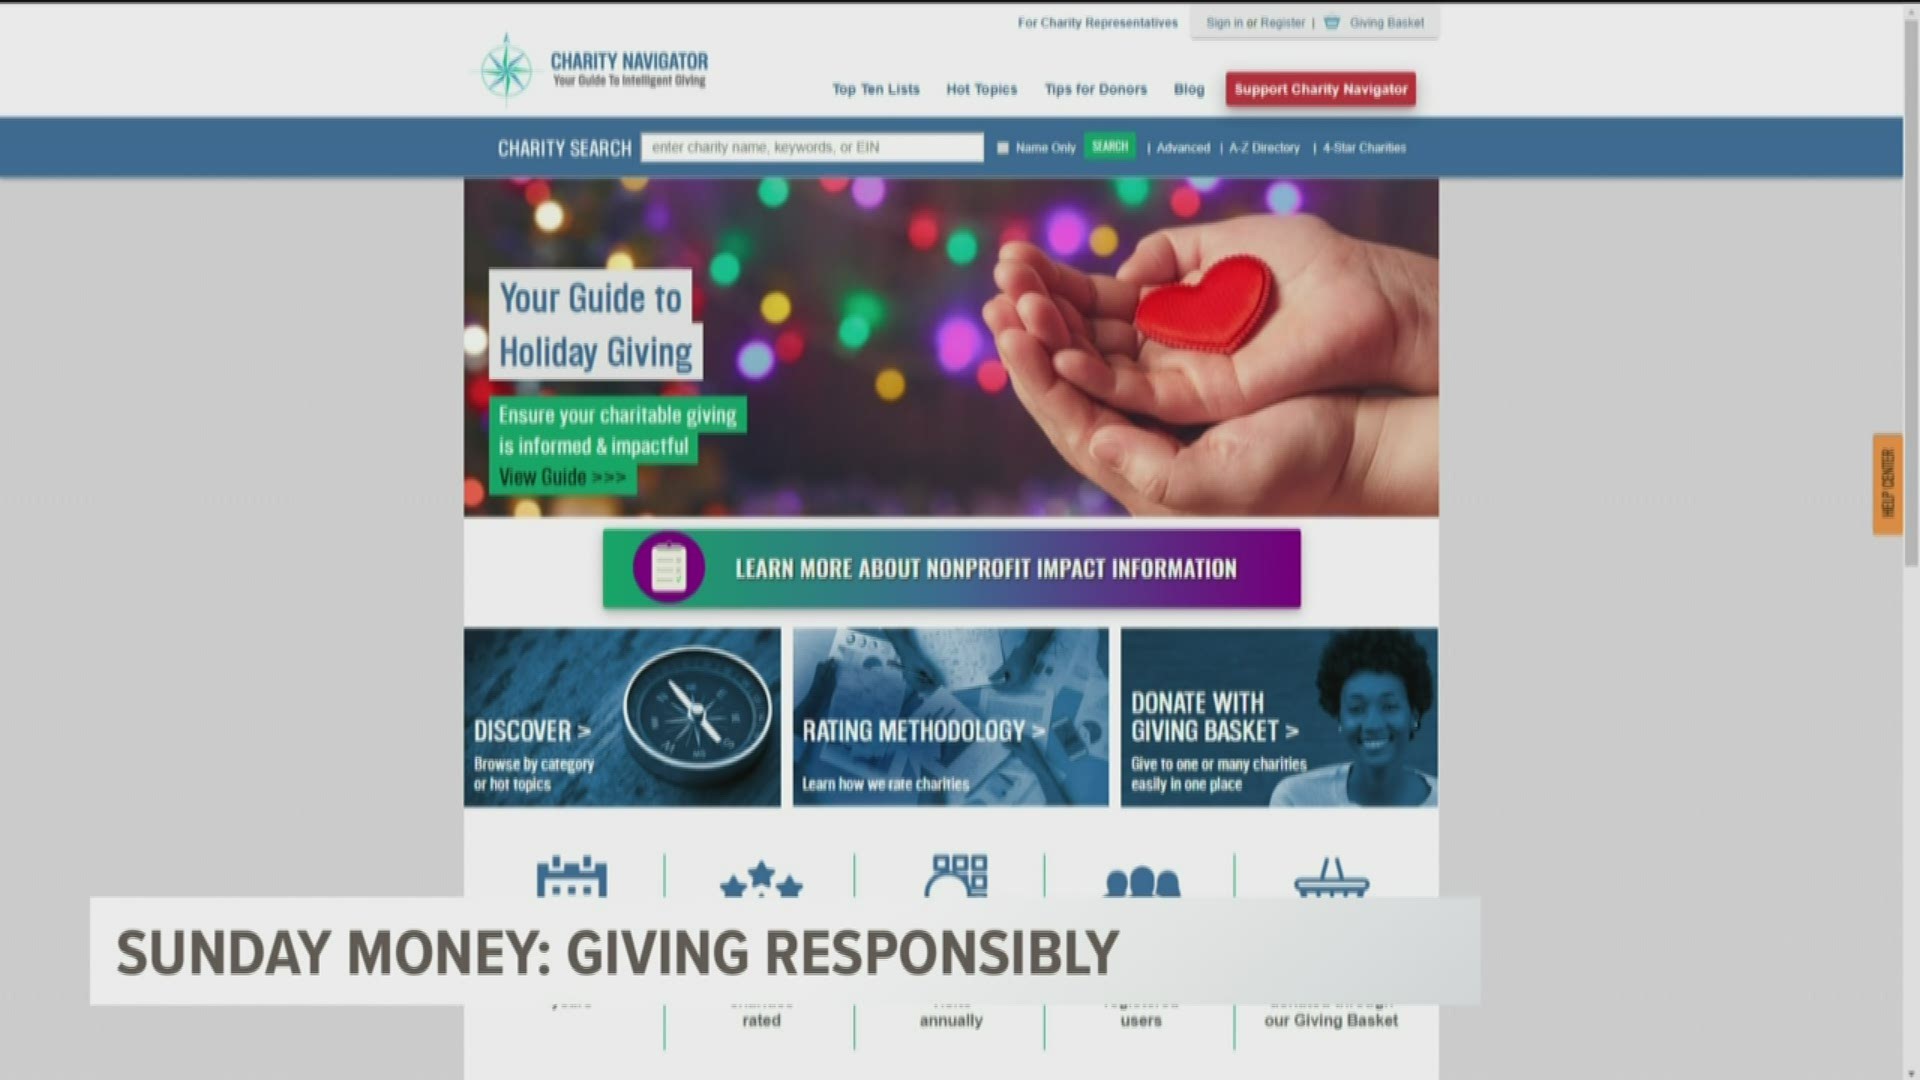 Our moneyman Paul Fain from Asset Planning Corporation joins us to talk about giving responsibly over the holidays.